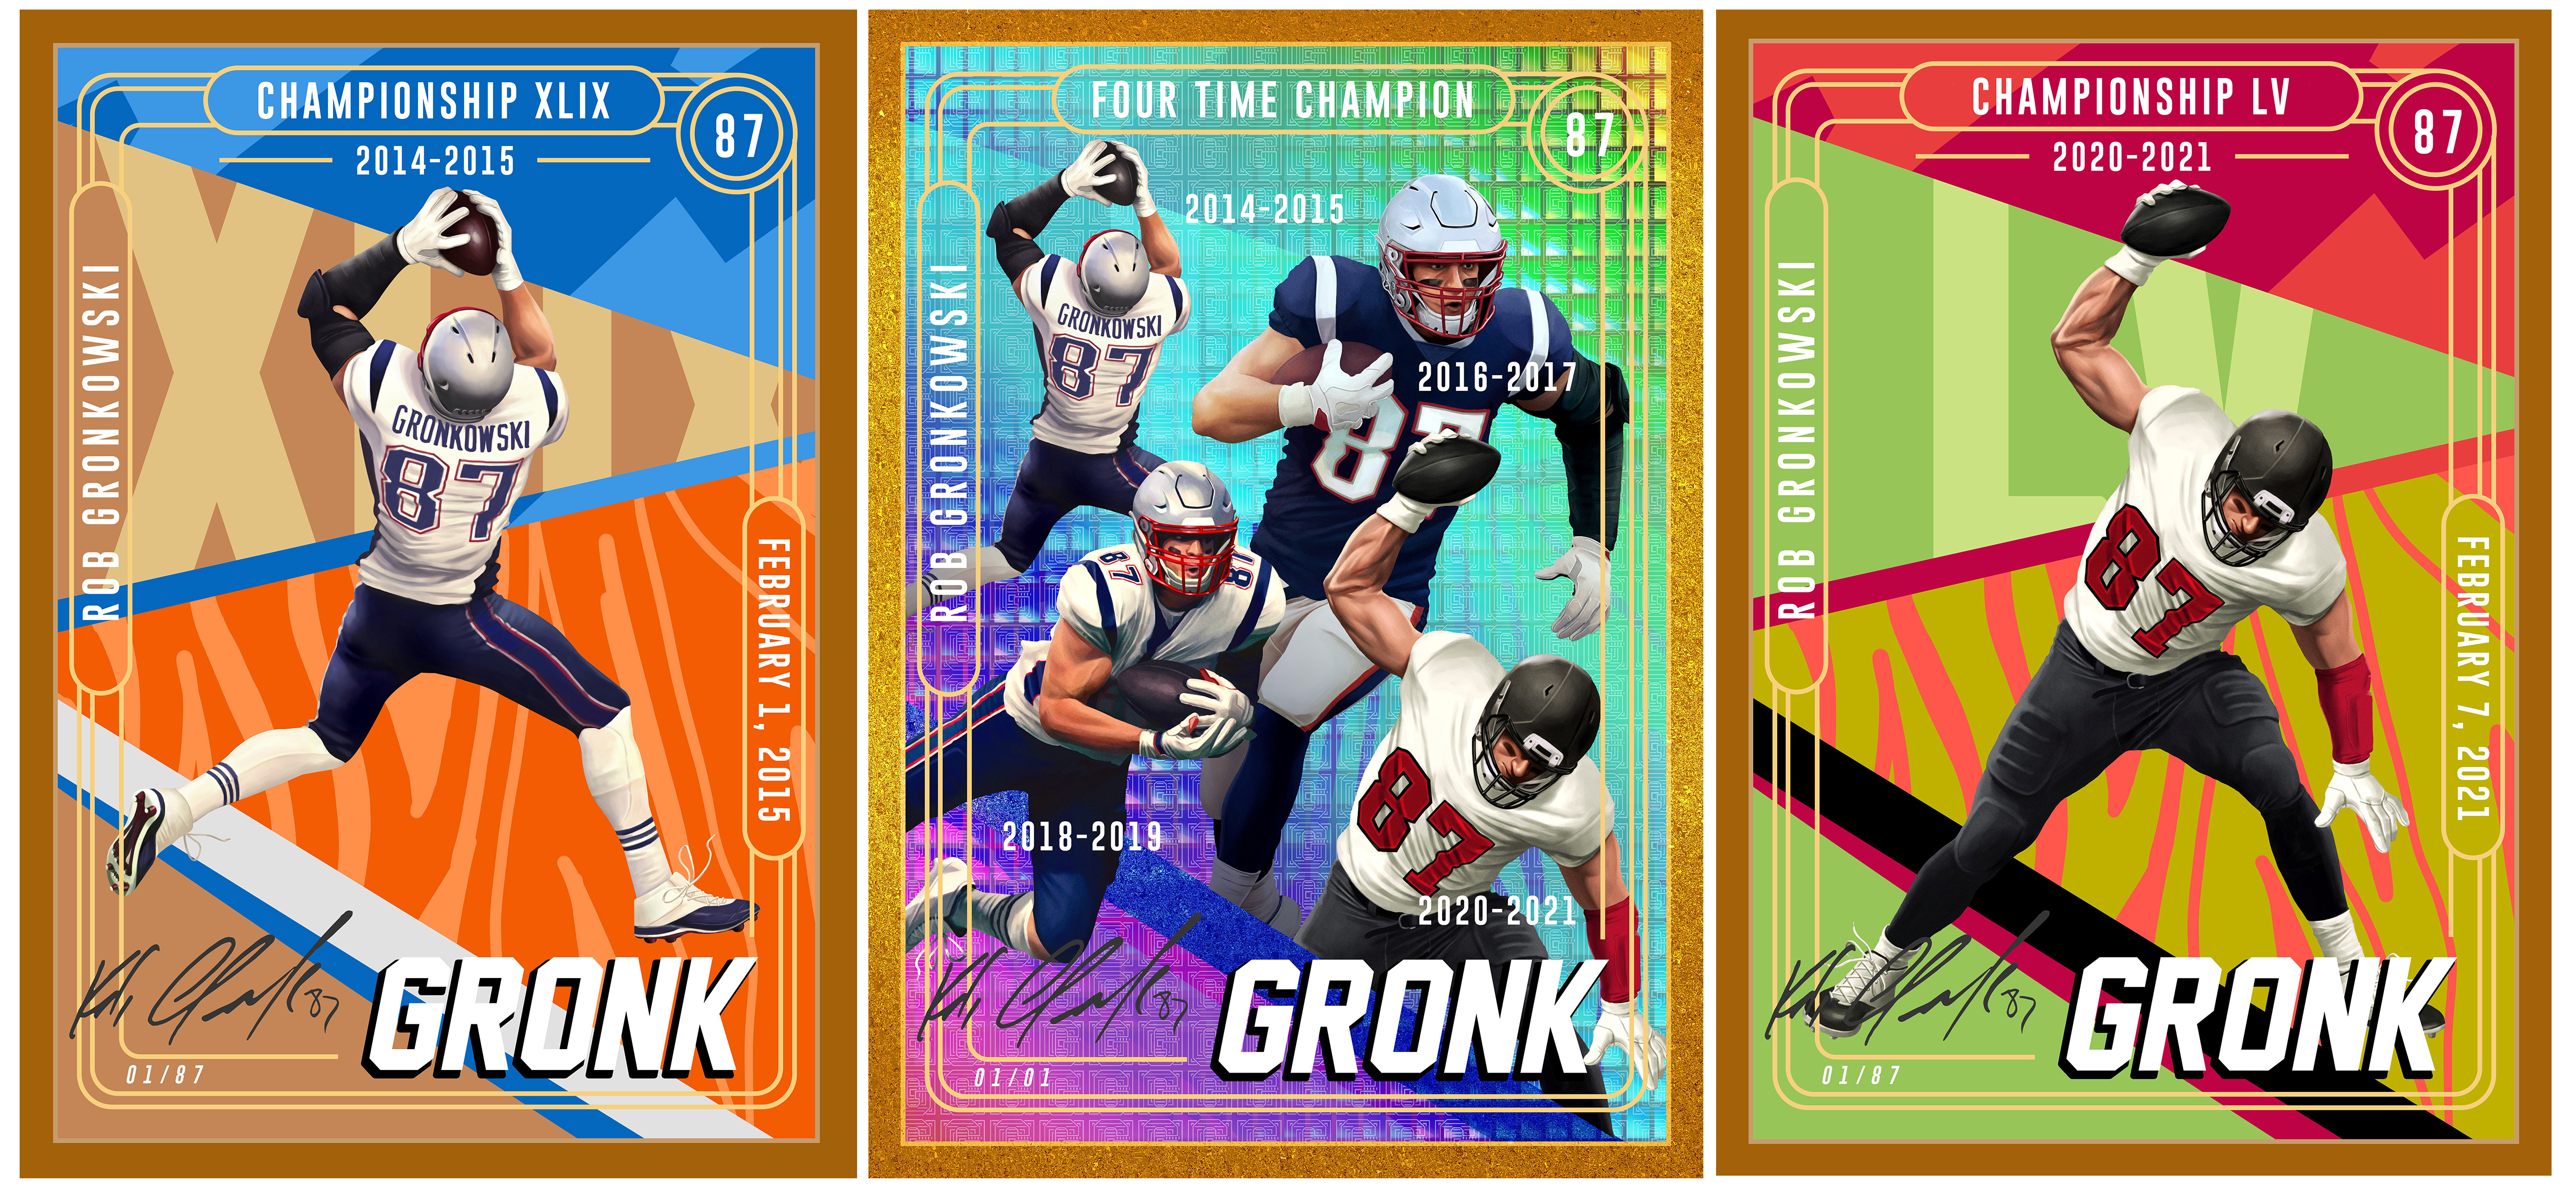 Tampa Bay Buccaneers tight end Rob Gronkowski features as the first pro athlete to release NFT trading cards